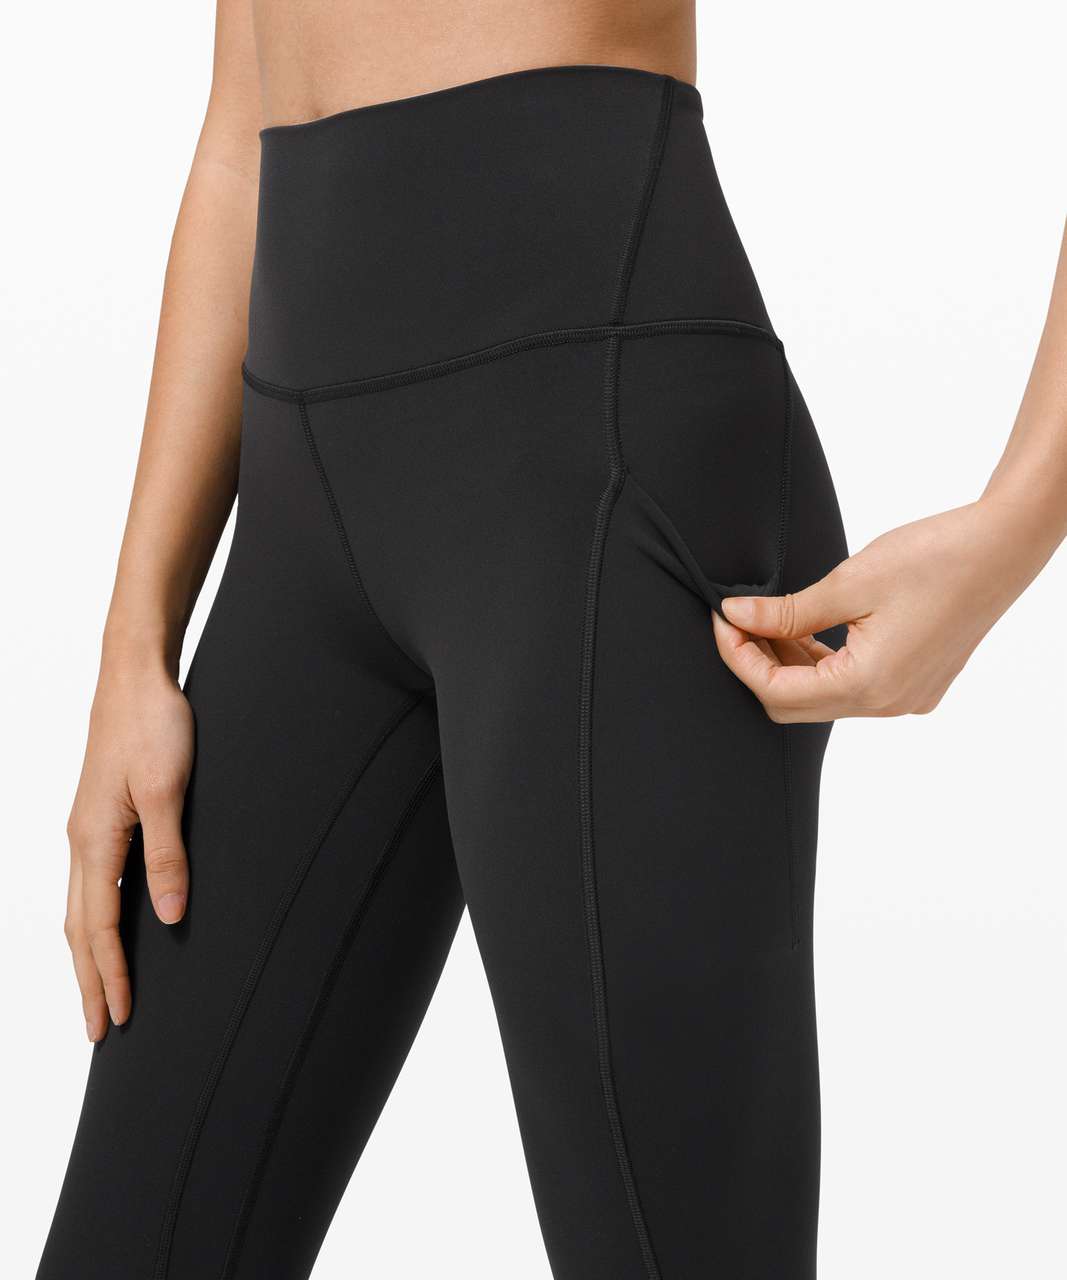 Lululemon Align High Rise Crop with Pockets 23